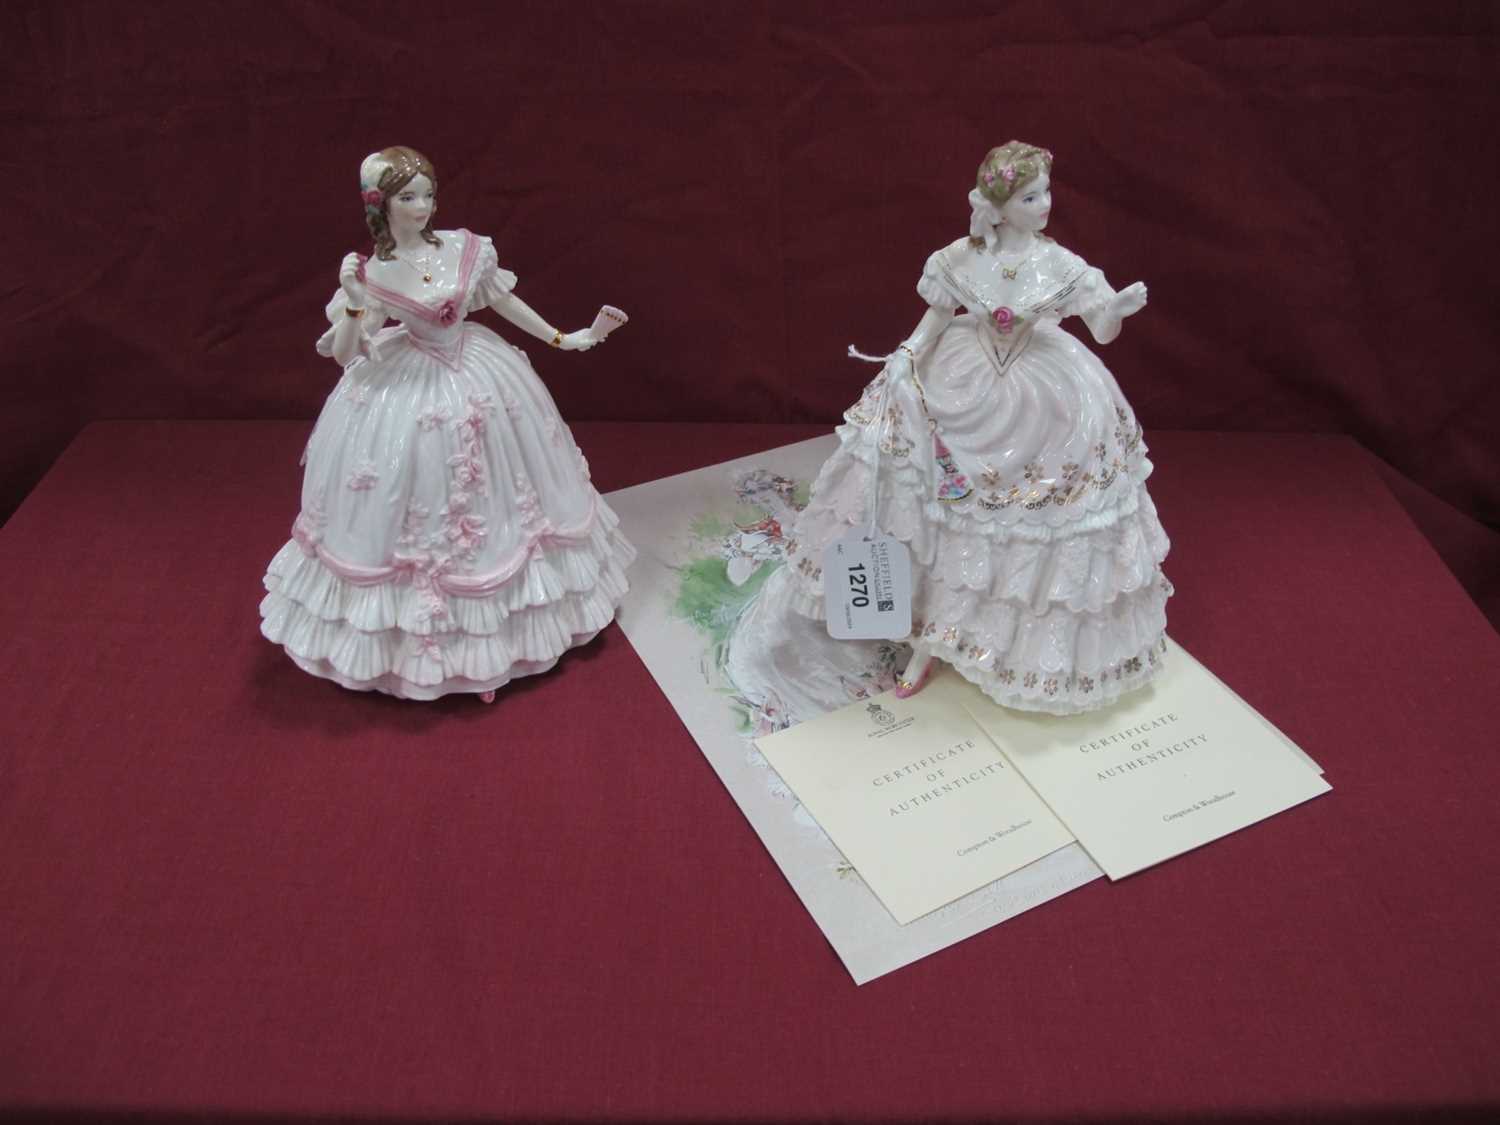 Royal Worcester Figurines 'The Masquerade Begins' and 'The Fairest Rose' each limited edition of